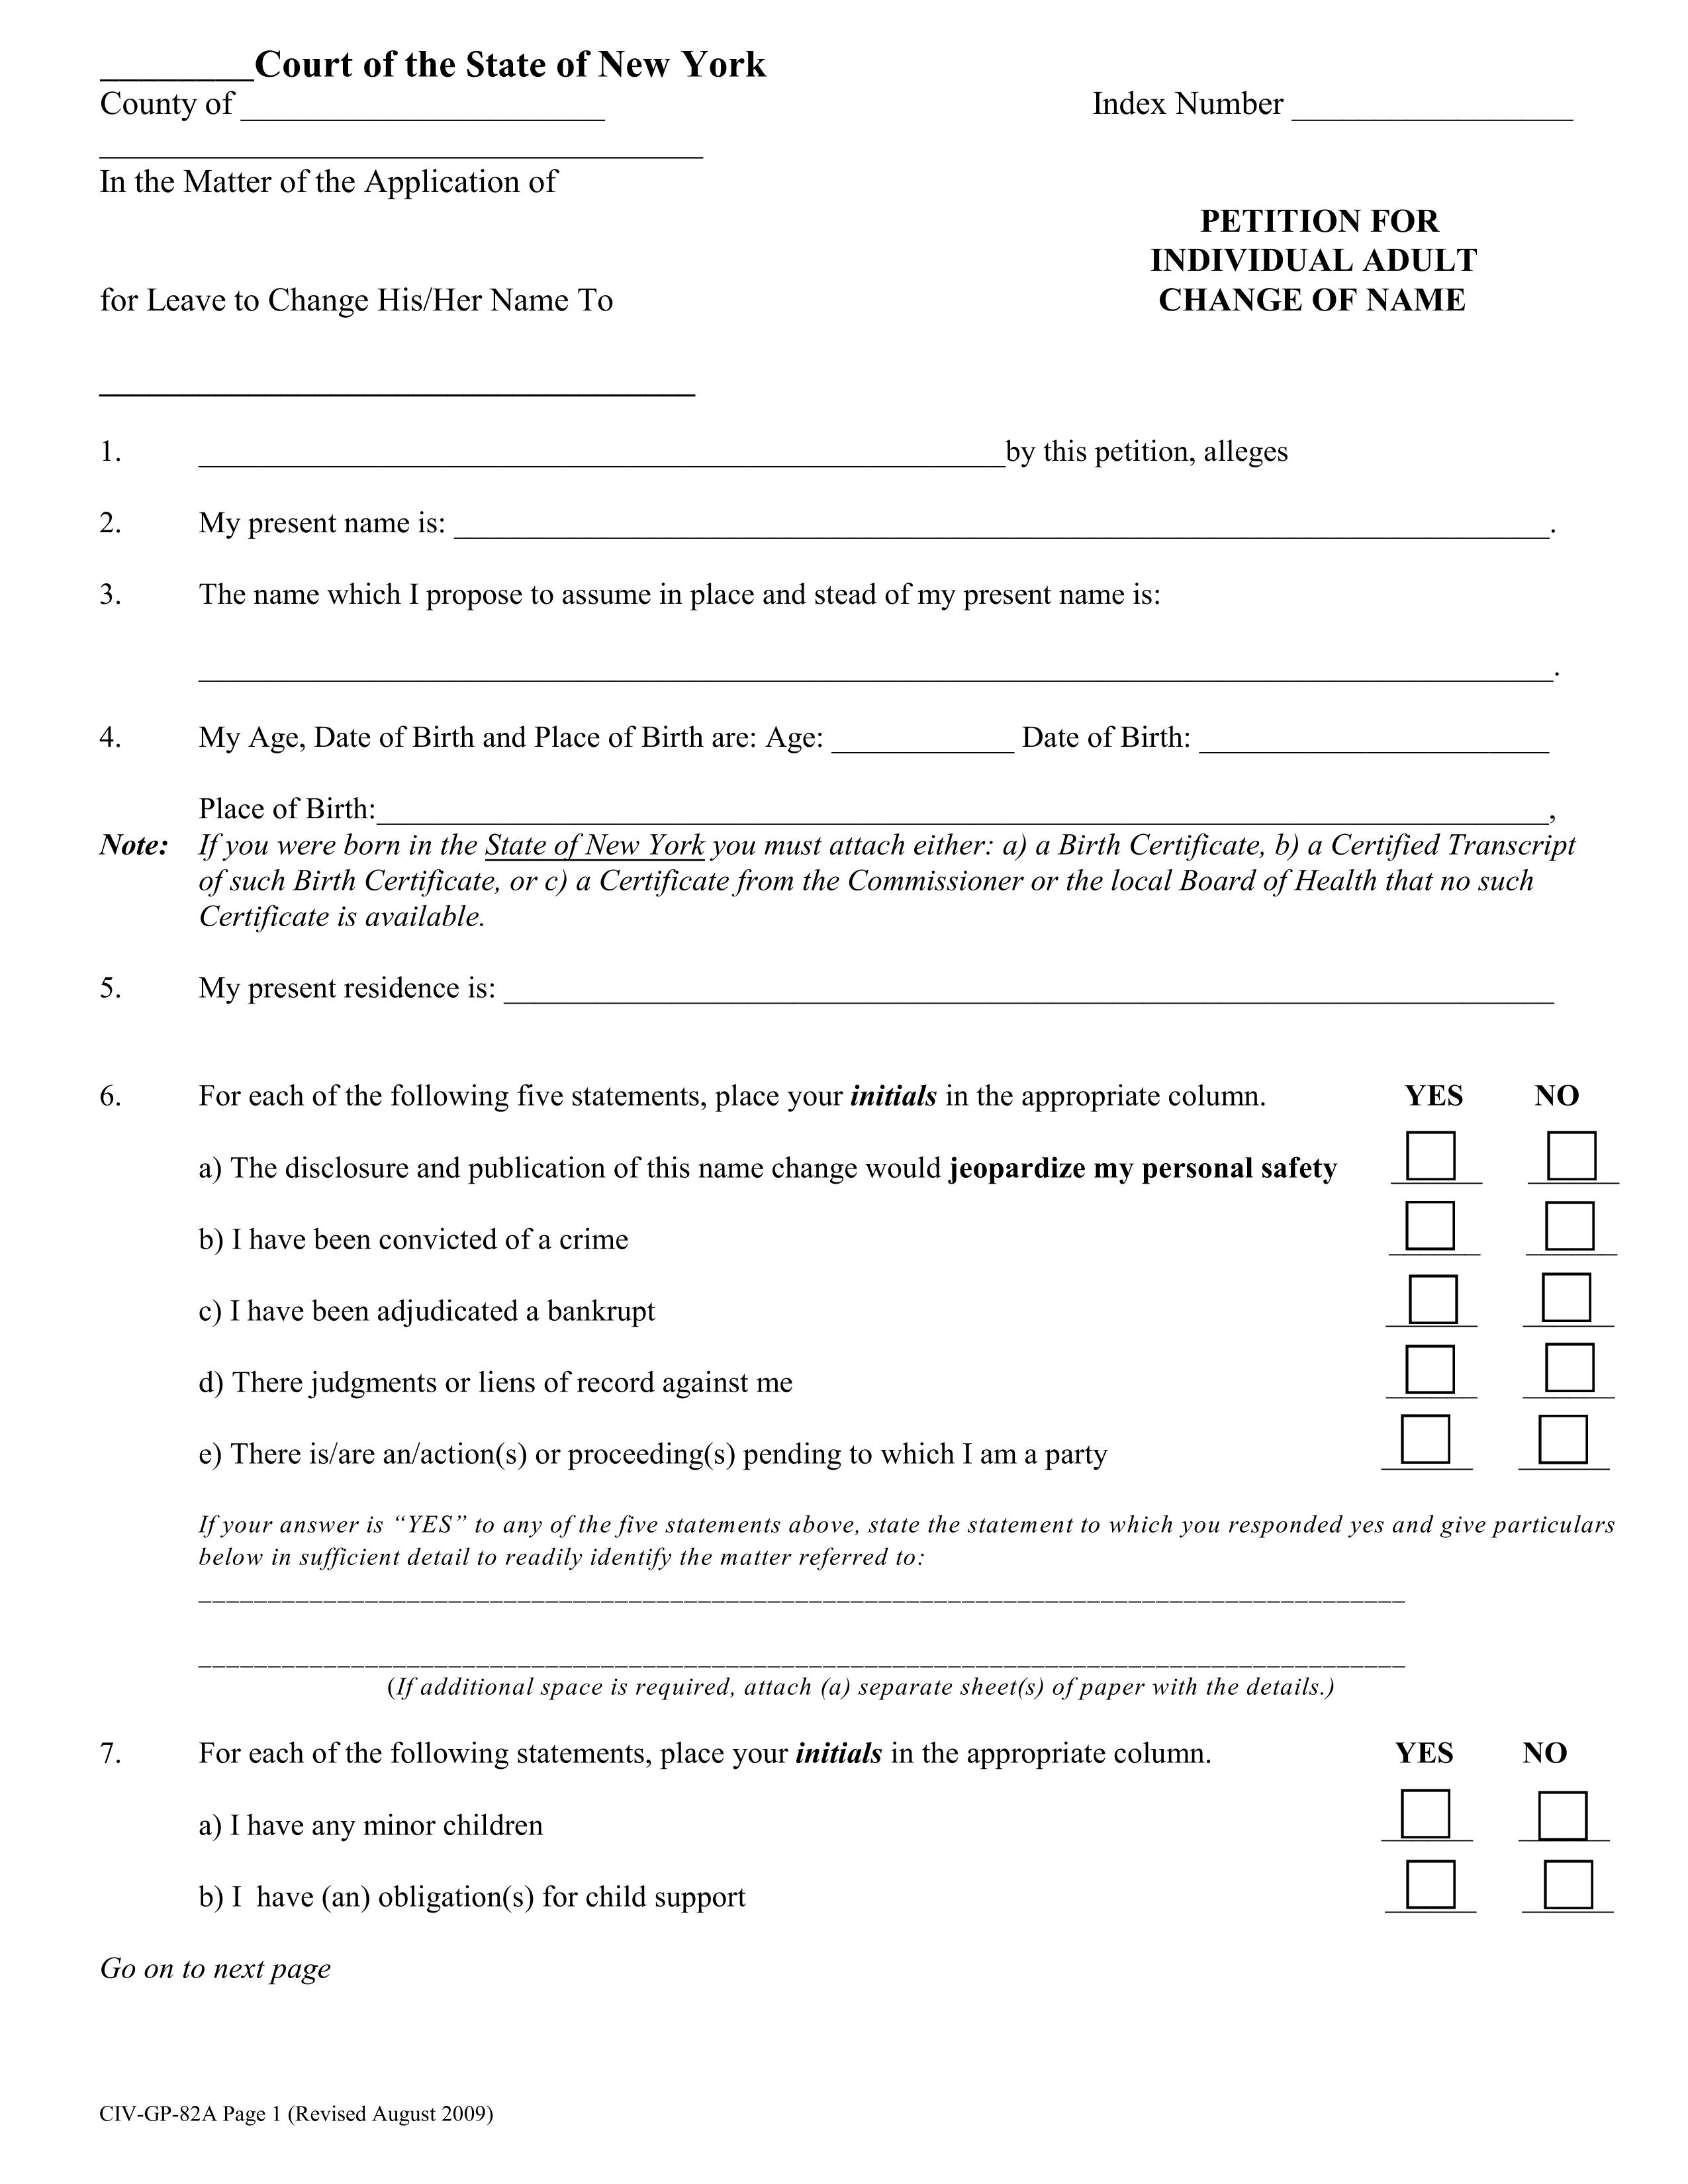 Name Change Form in New York